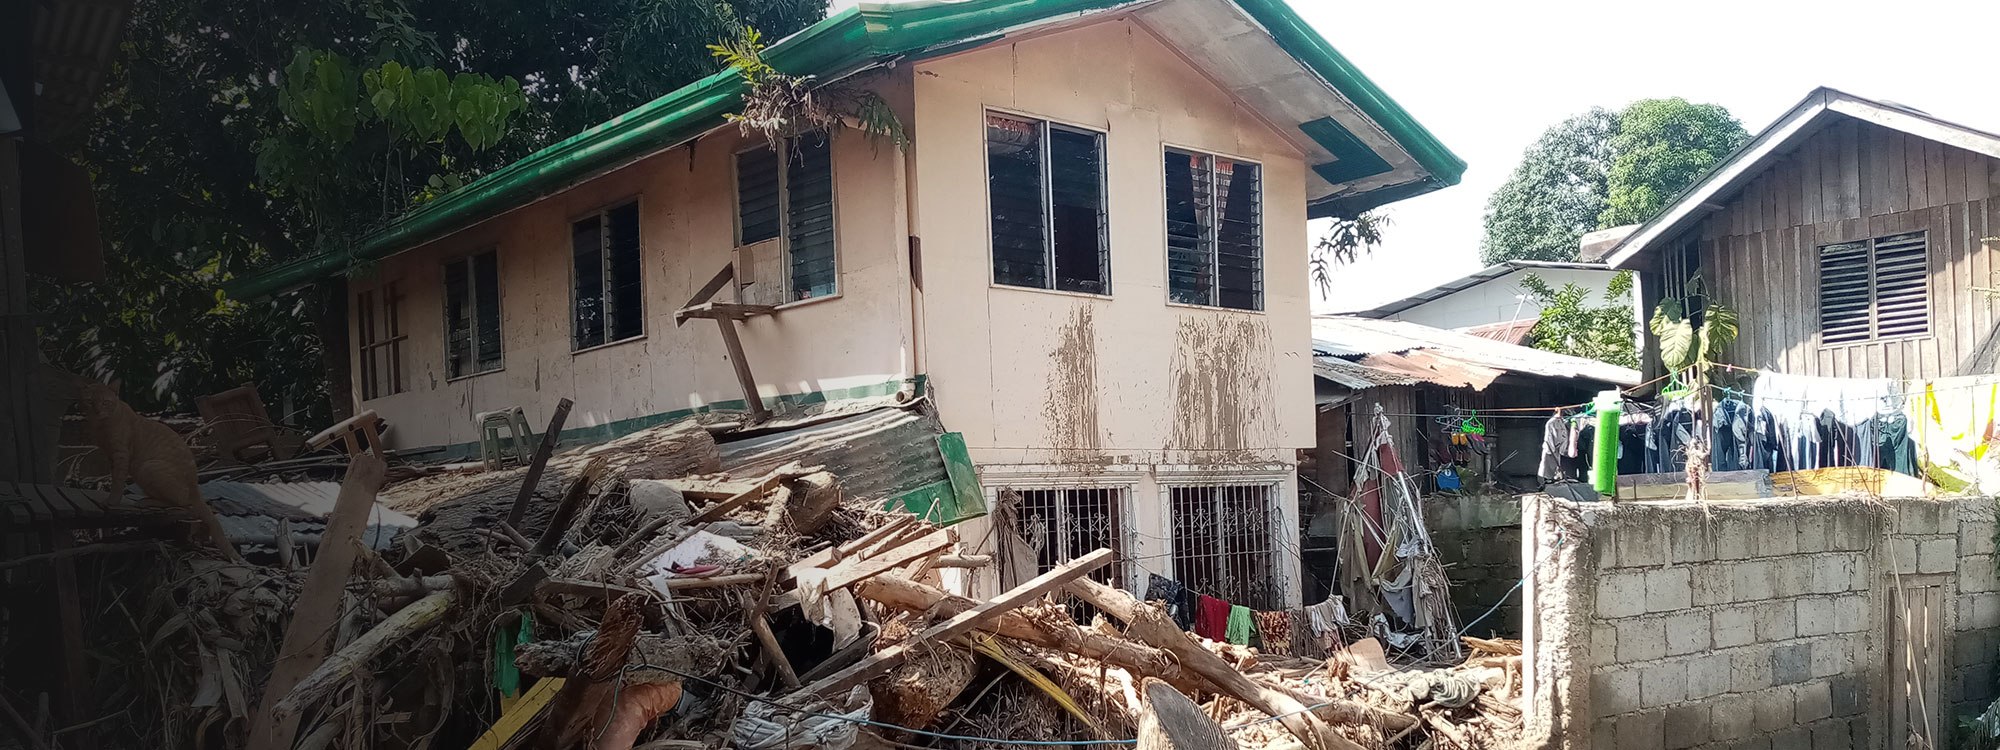 House surrounded by rubble after tropical storm in the philippines